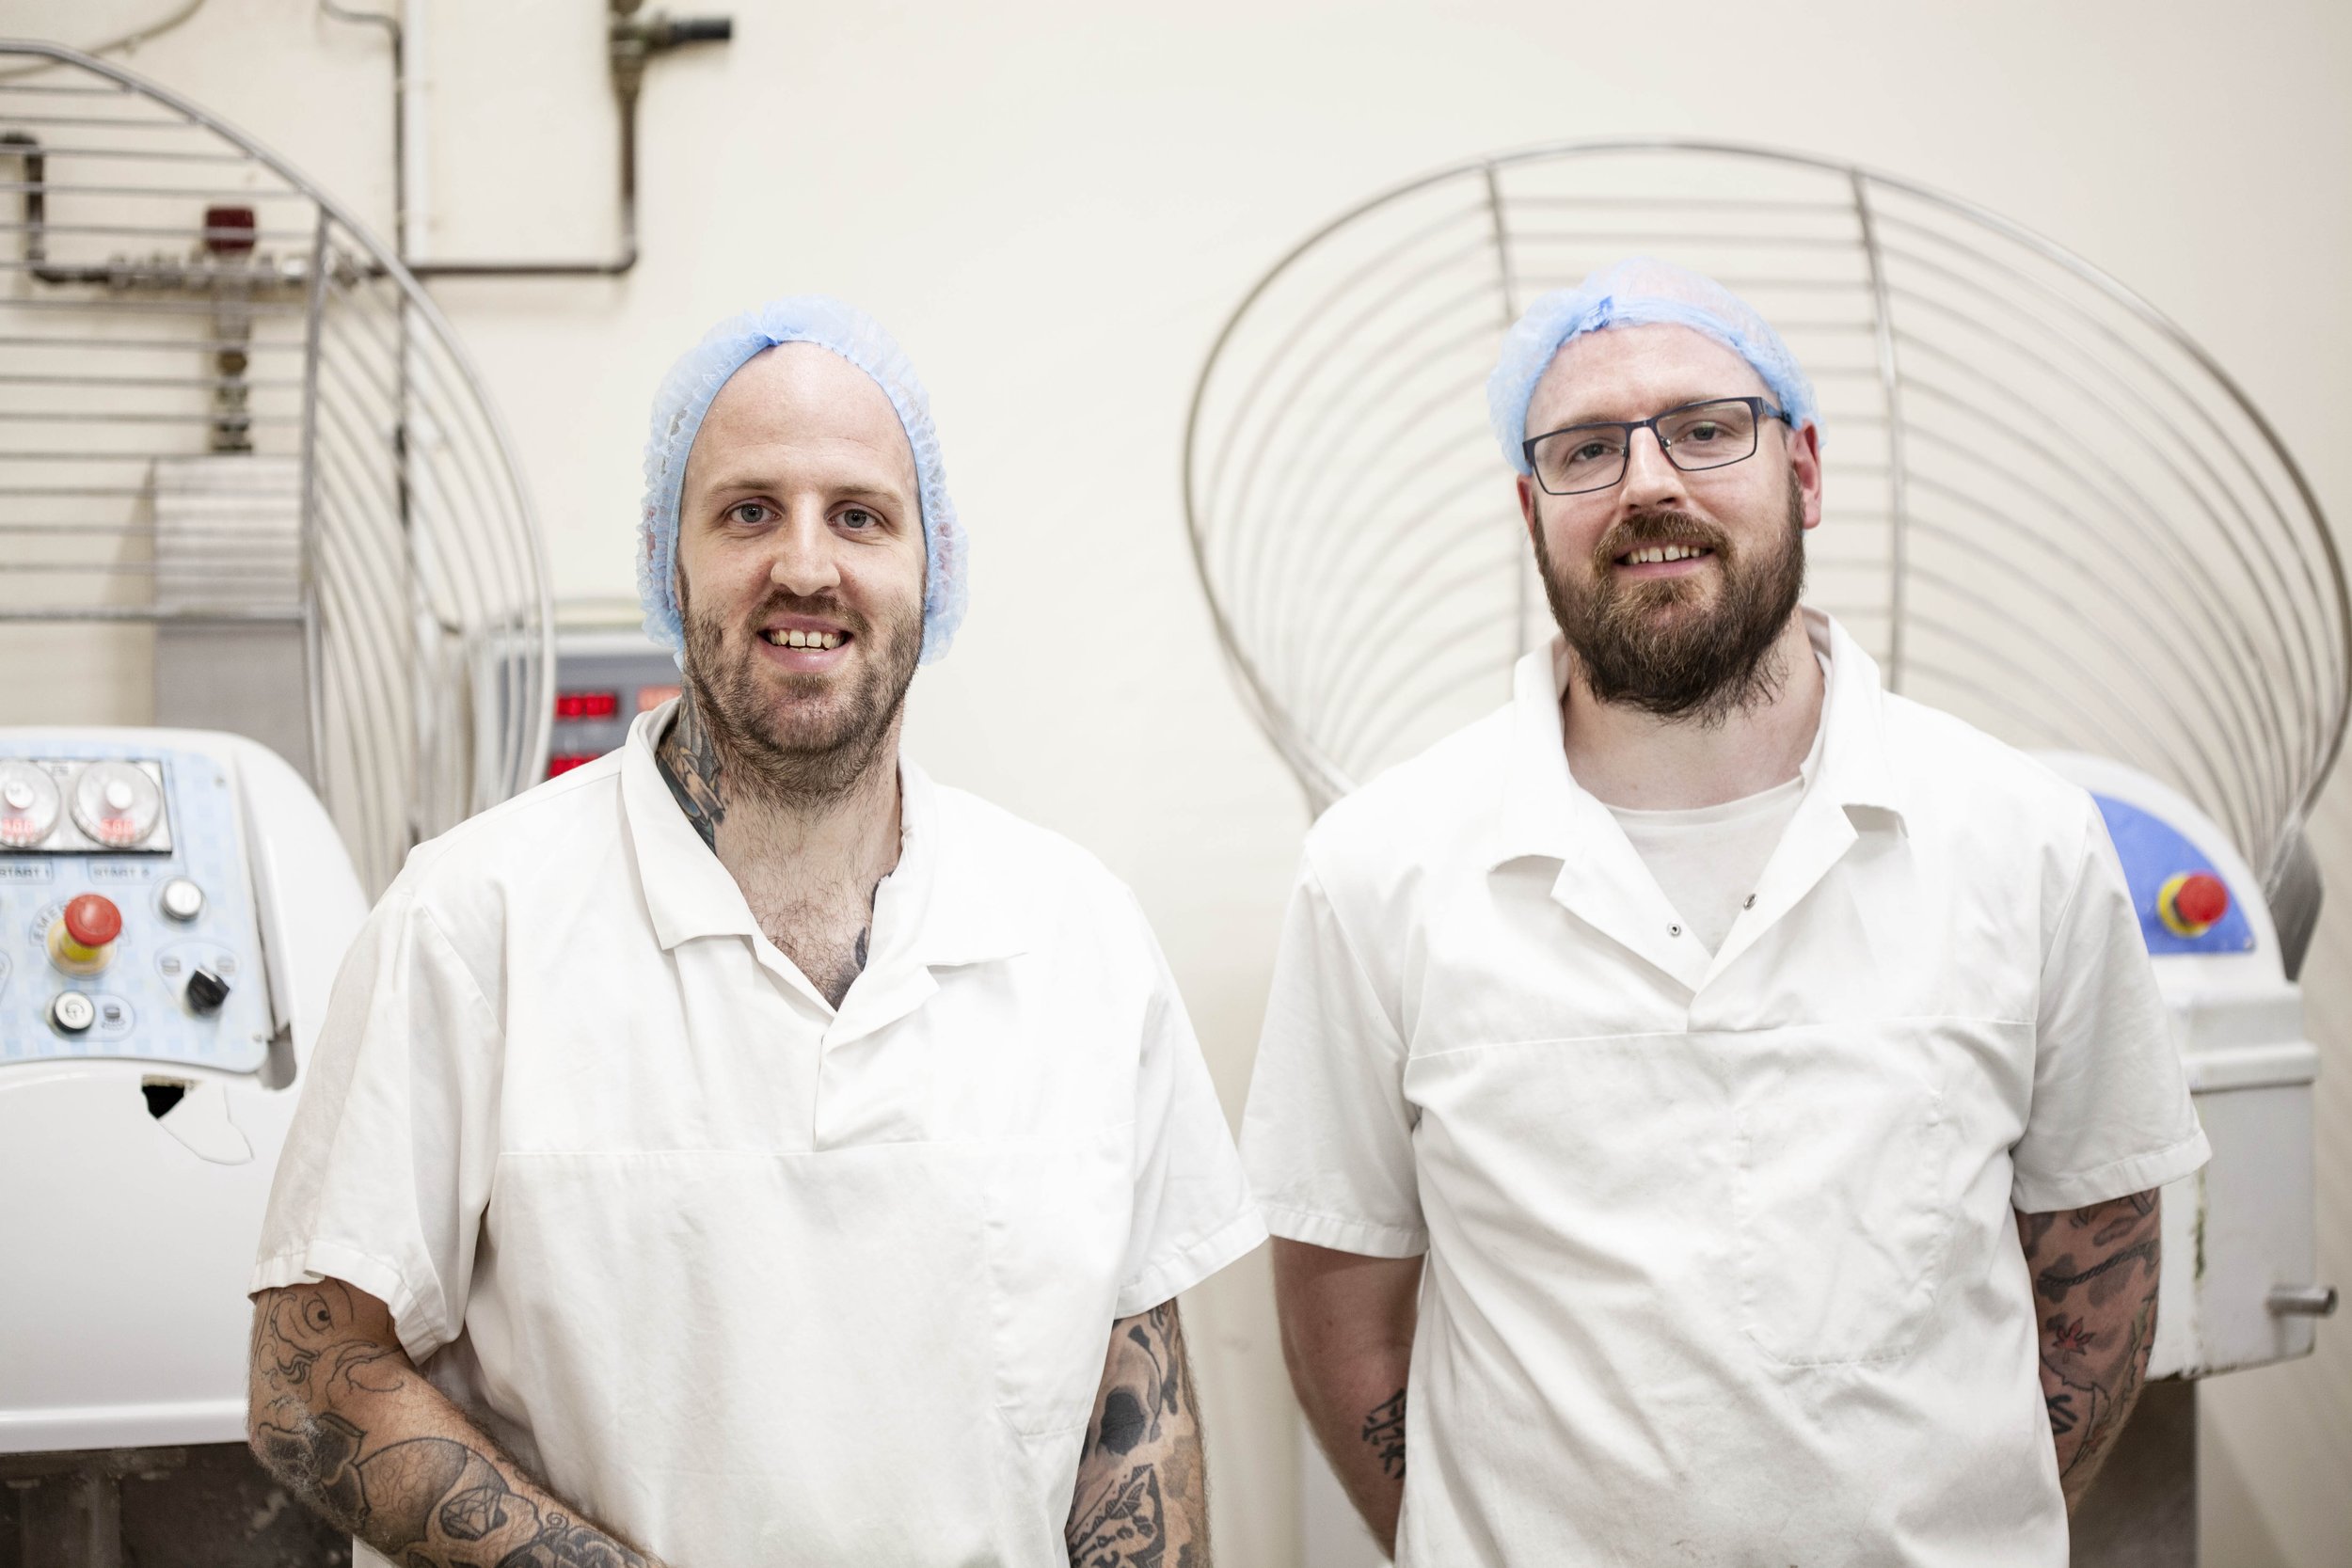 Landscape photograph by Hatty Frances Bell of two male bakers at Linzers Bakery in Norwich wearing white clothing and blue hairnets